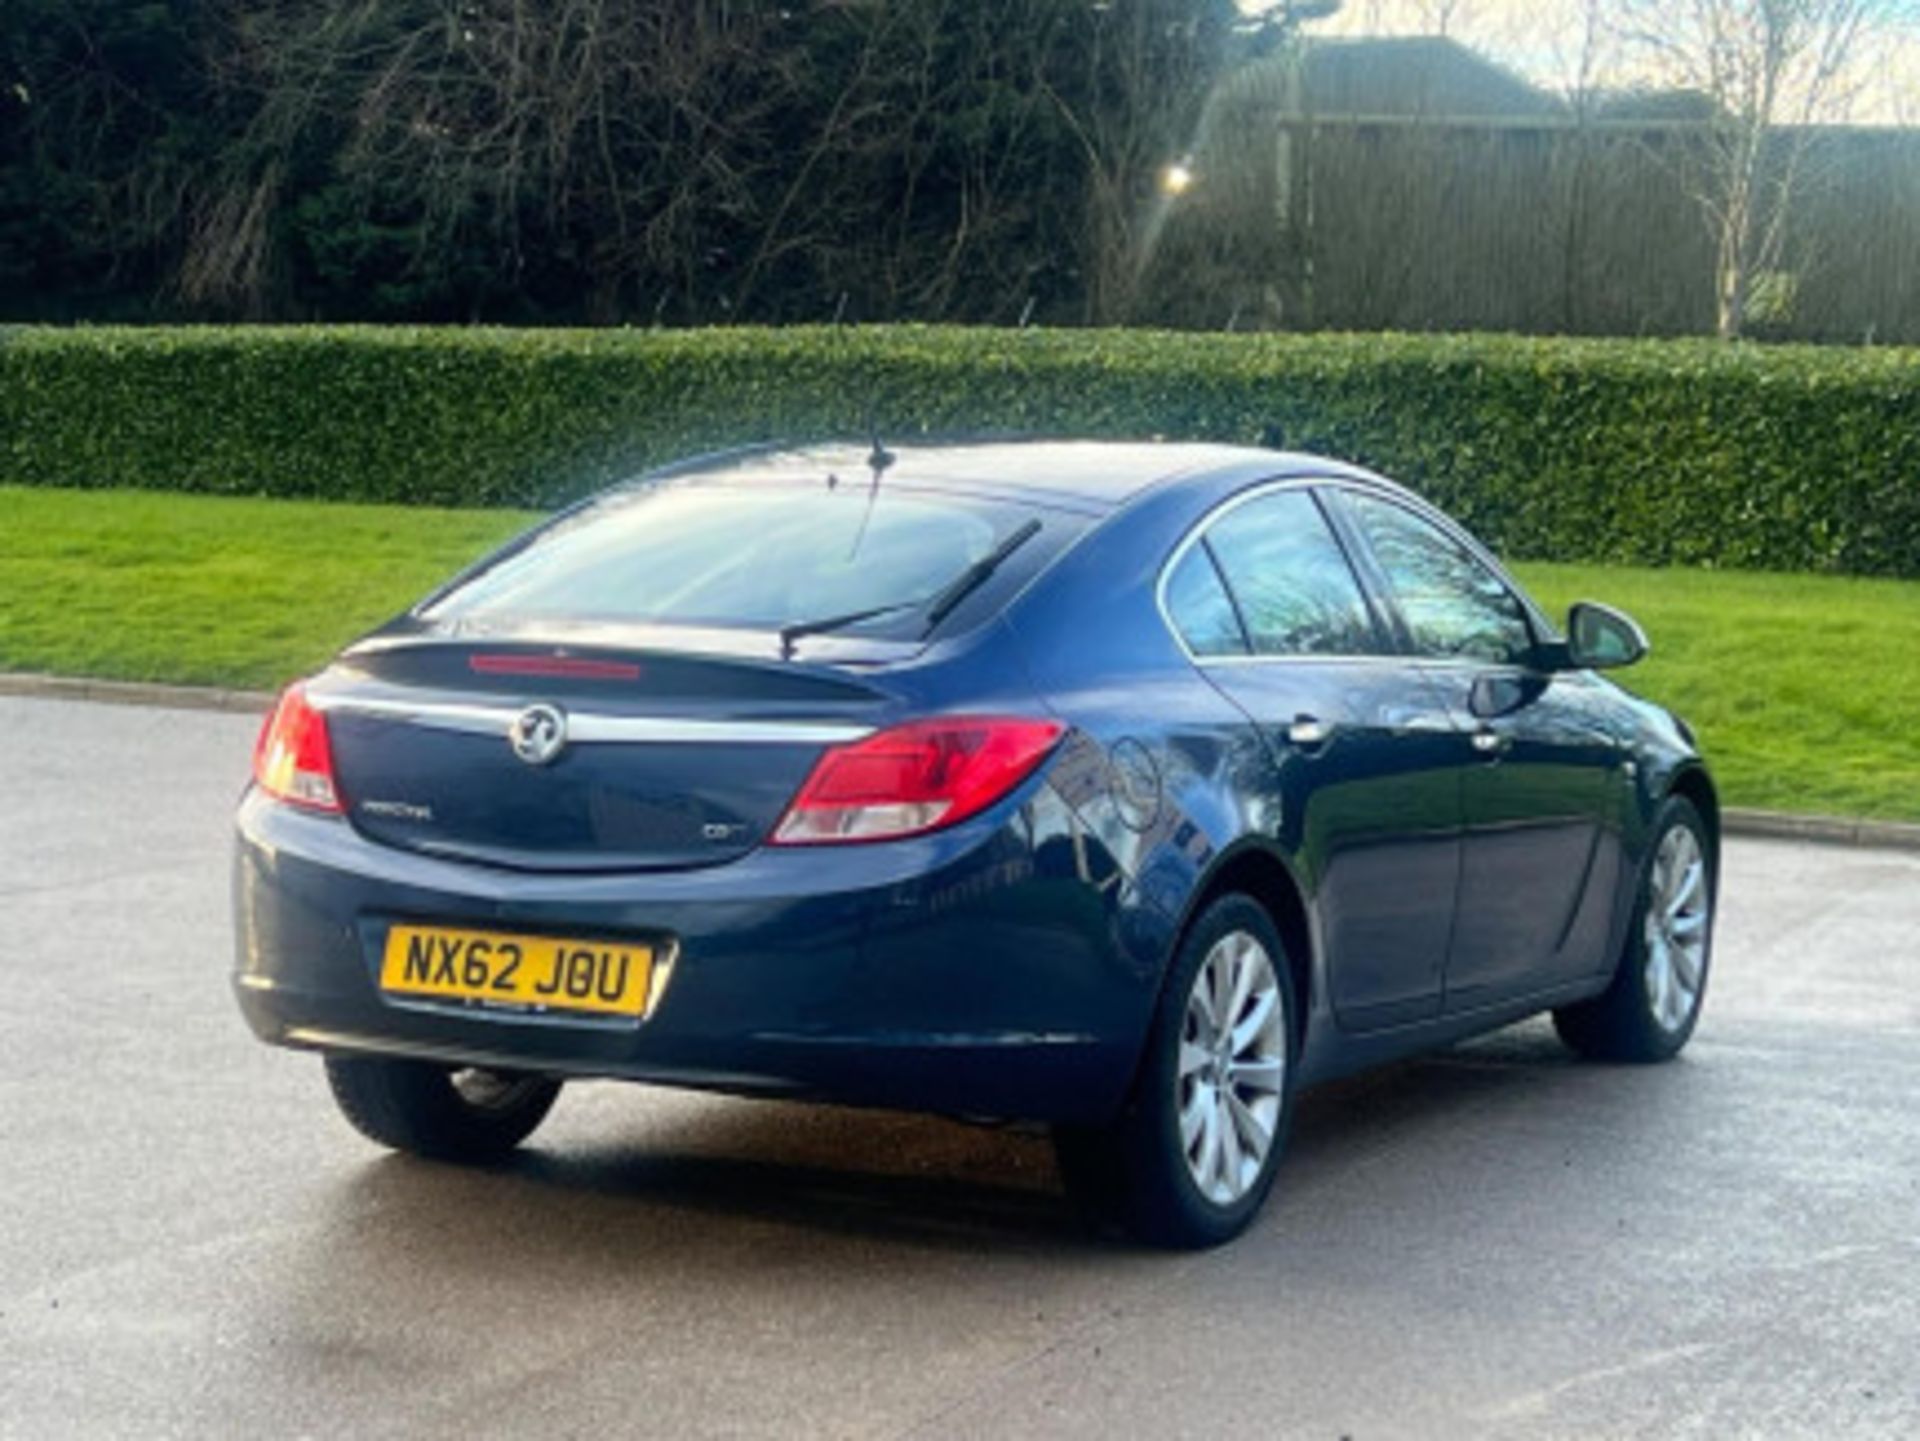 2012 VAUXHALL INSIGNIA 2.0 CDTI ELITE AUTO EURO 5 - DISCOVER EXCELLENCE >>--NO VAT ON HAMMER--<< - Image 48 of 120